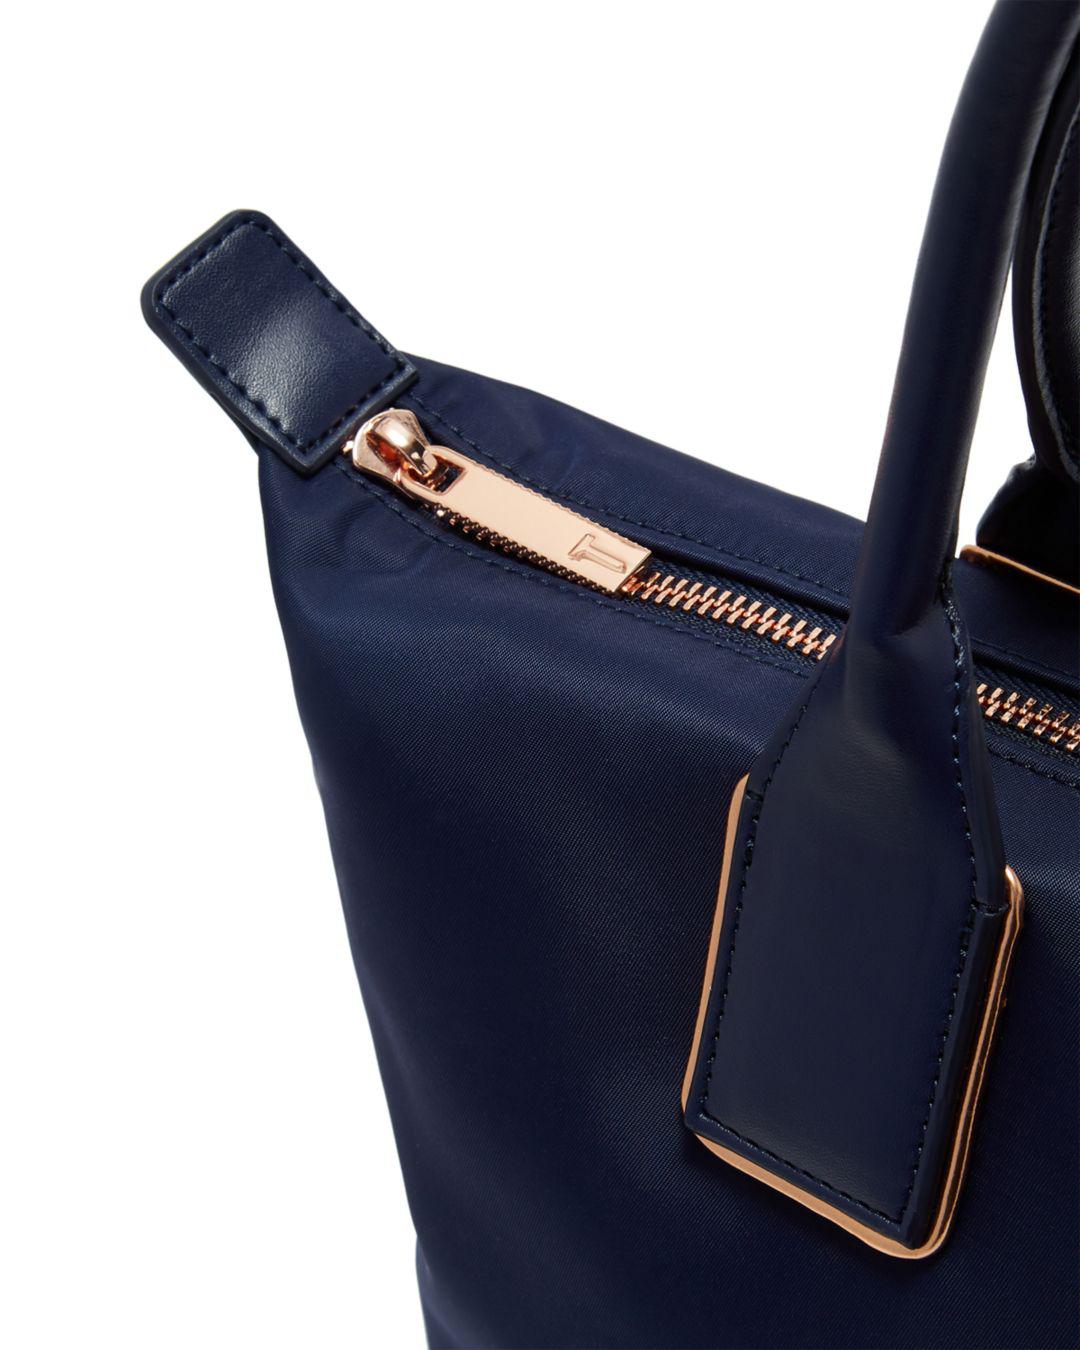 Ted Baker Synthetic Small Tote Bag in Dark Blue/Gold (Blue) - Lyst